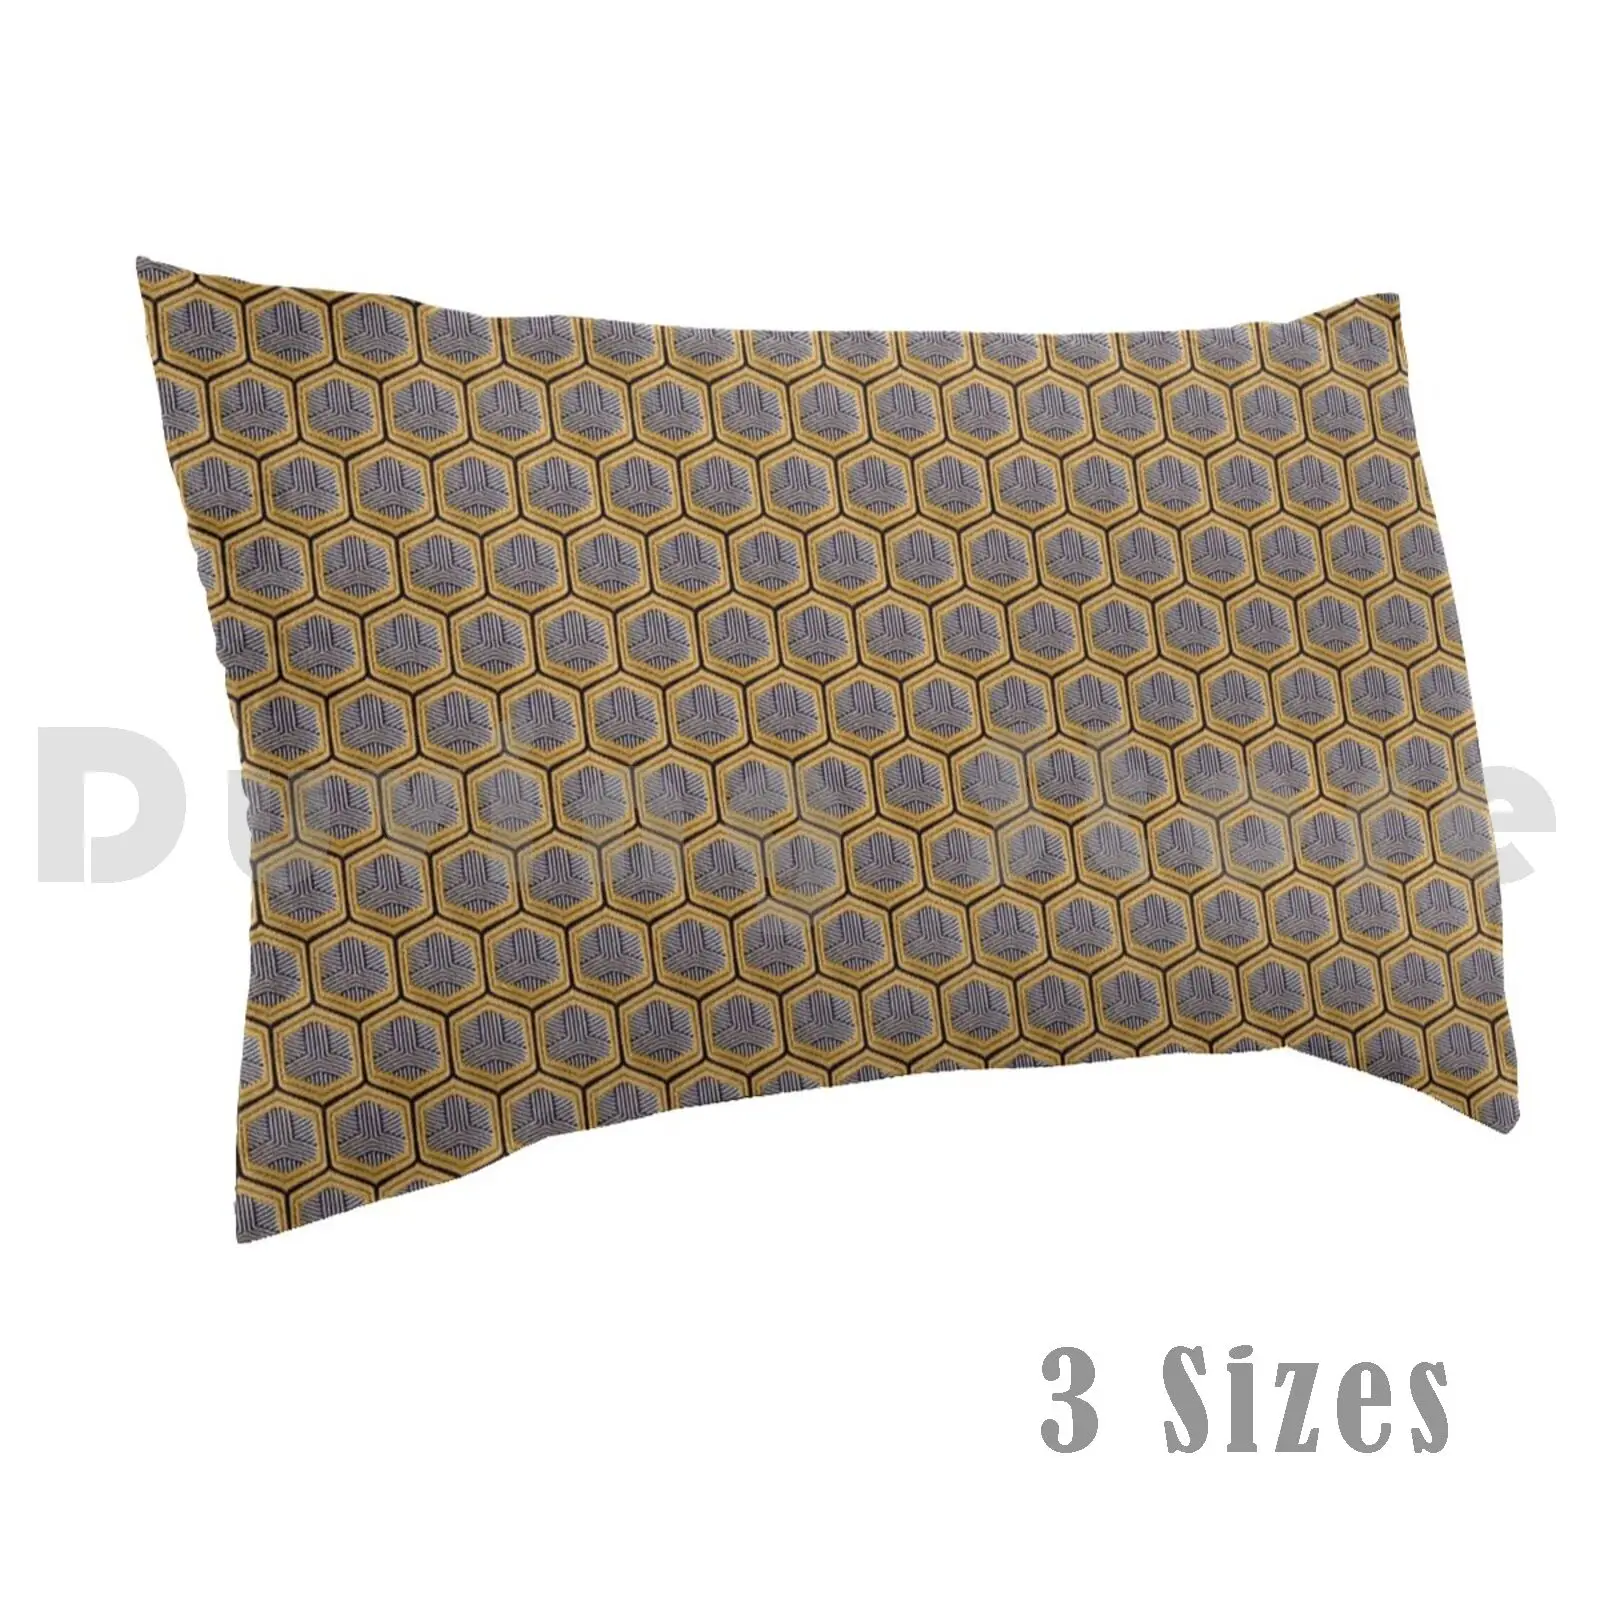 

Yellow Beehive Hexagon Retro Pattern Pillow Case 20x30 inch 1950s 1960s 1970s 50s 60s 70s Cover Decorative